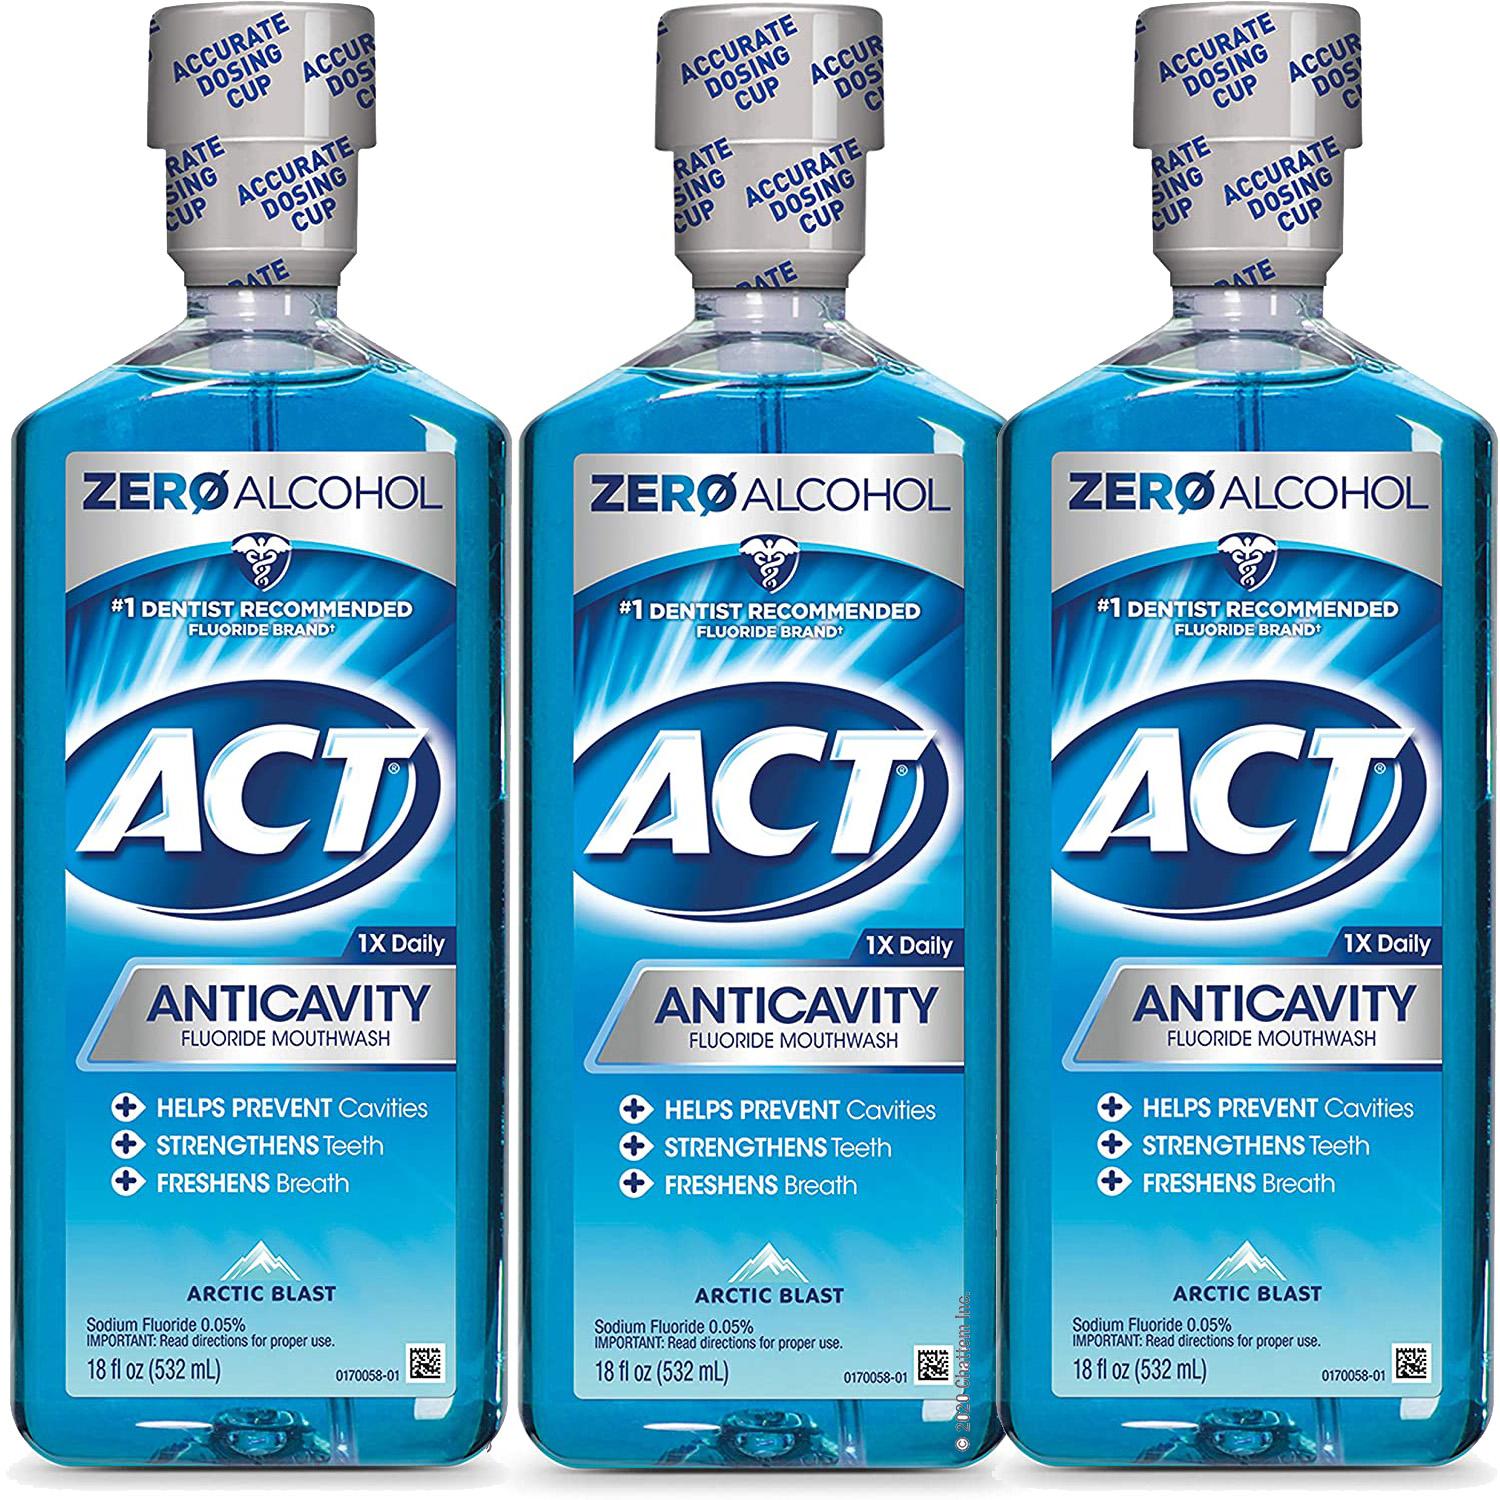 3 Act Anticavity Fluoride Mouthwash for $7.18